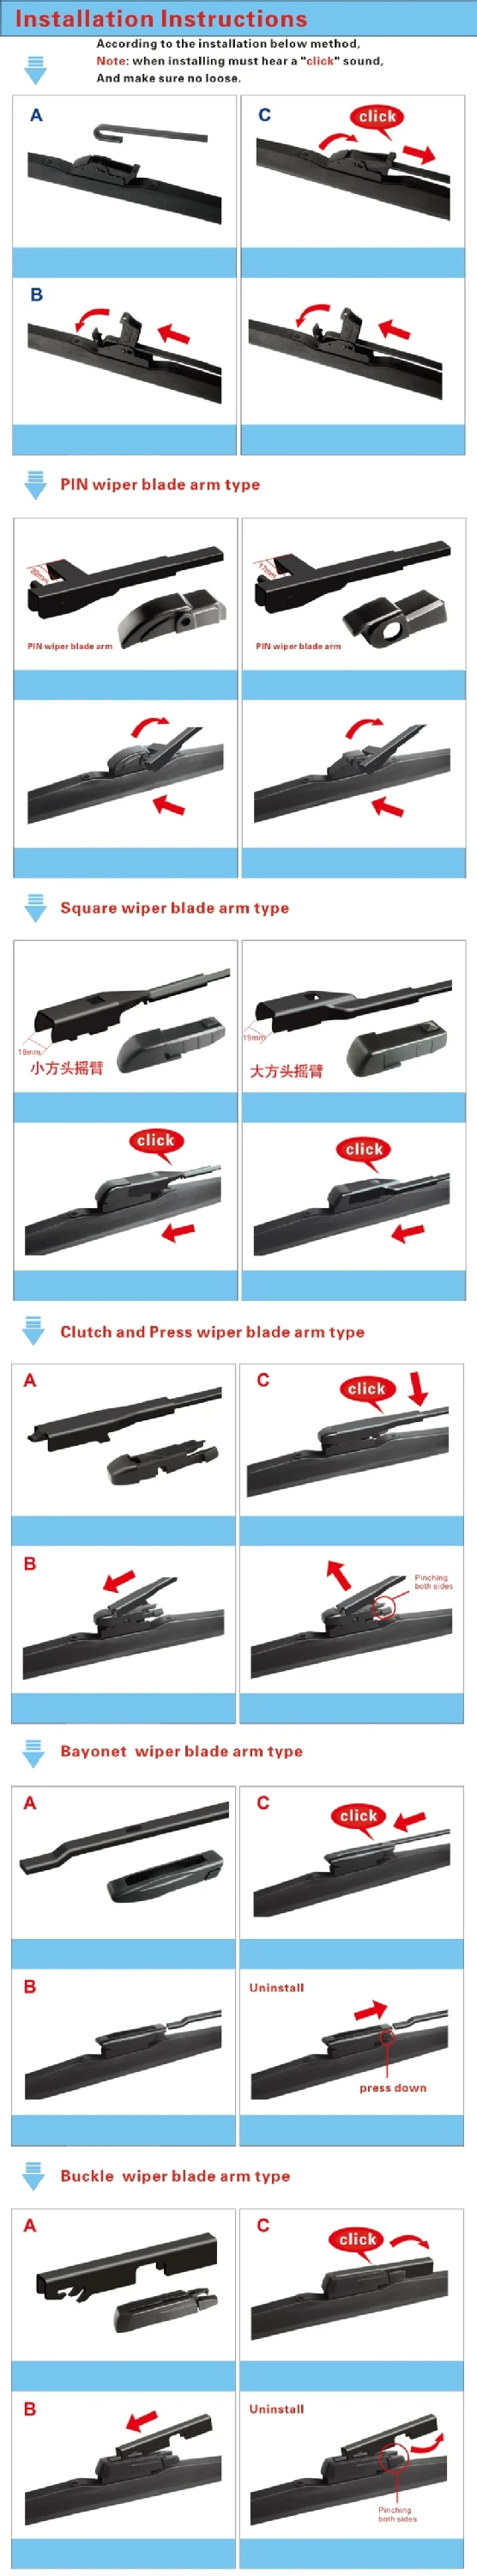 Latest Products In Market Snow Wiper Blade Hybrid Cars Wiper Blade Size